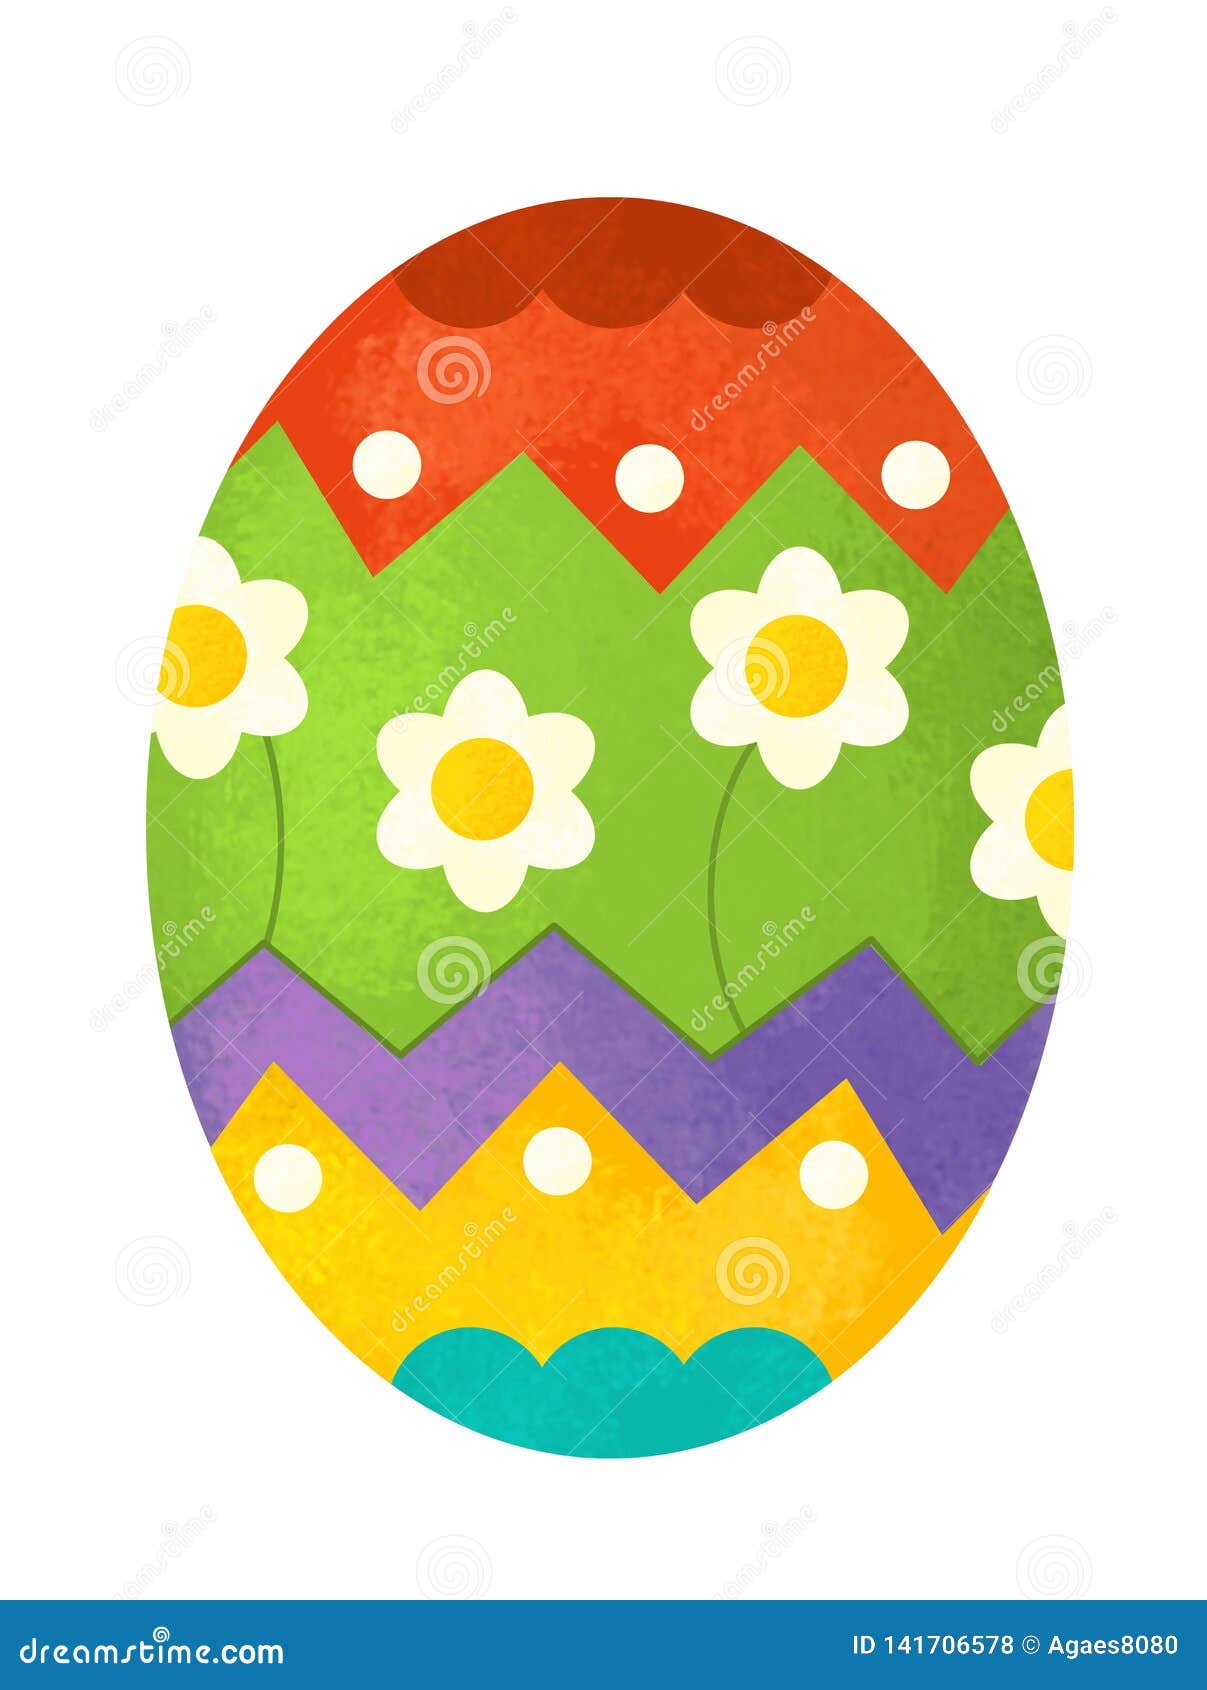 Cartoon Happy Easter Scene with Colorful Easter Egg on White Background  Stock Illustration - Illustration of pattern, happy: 141706578